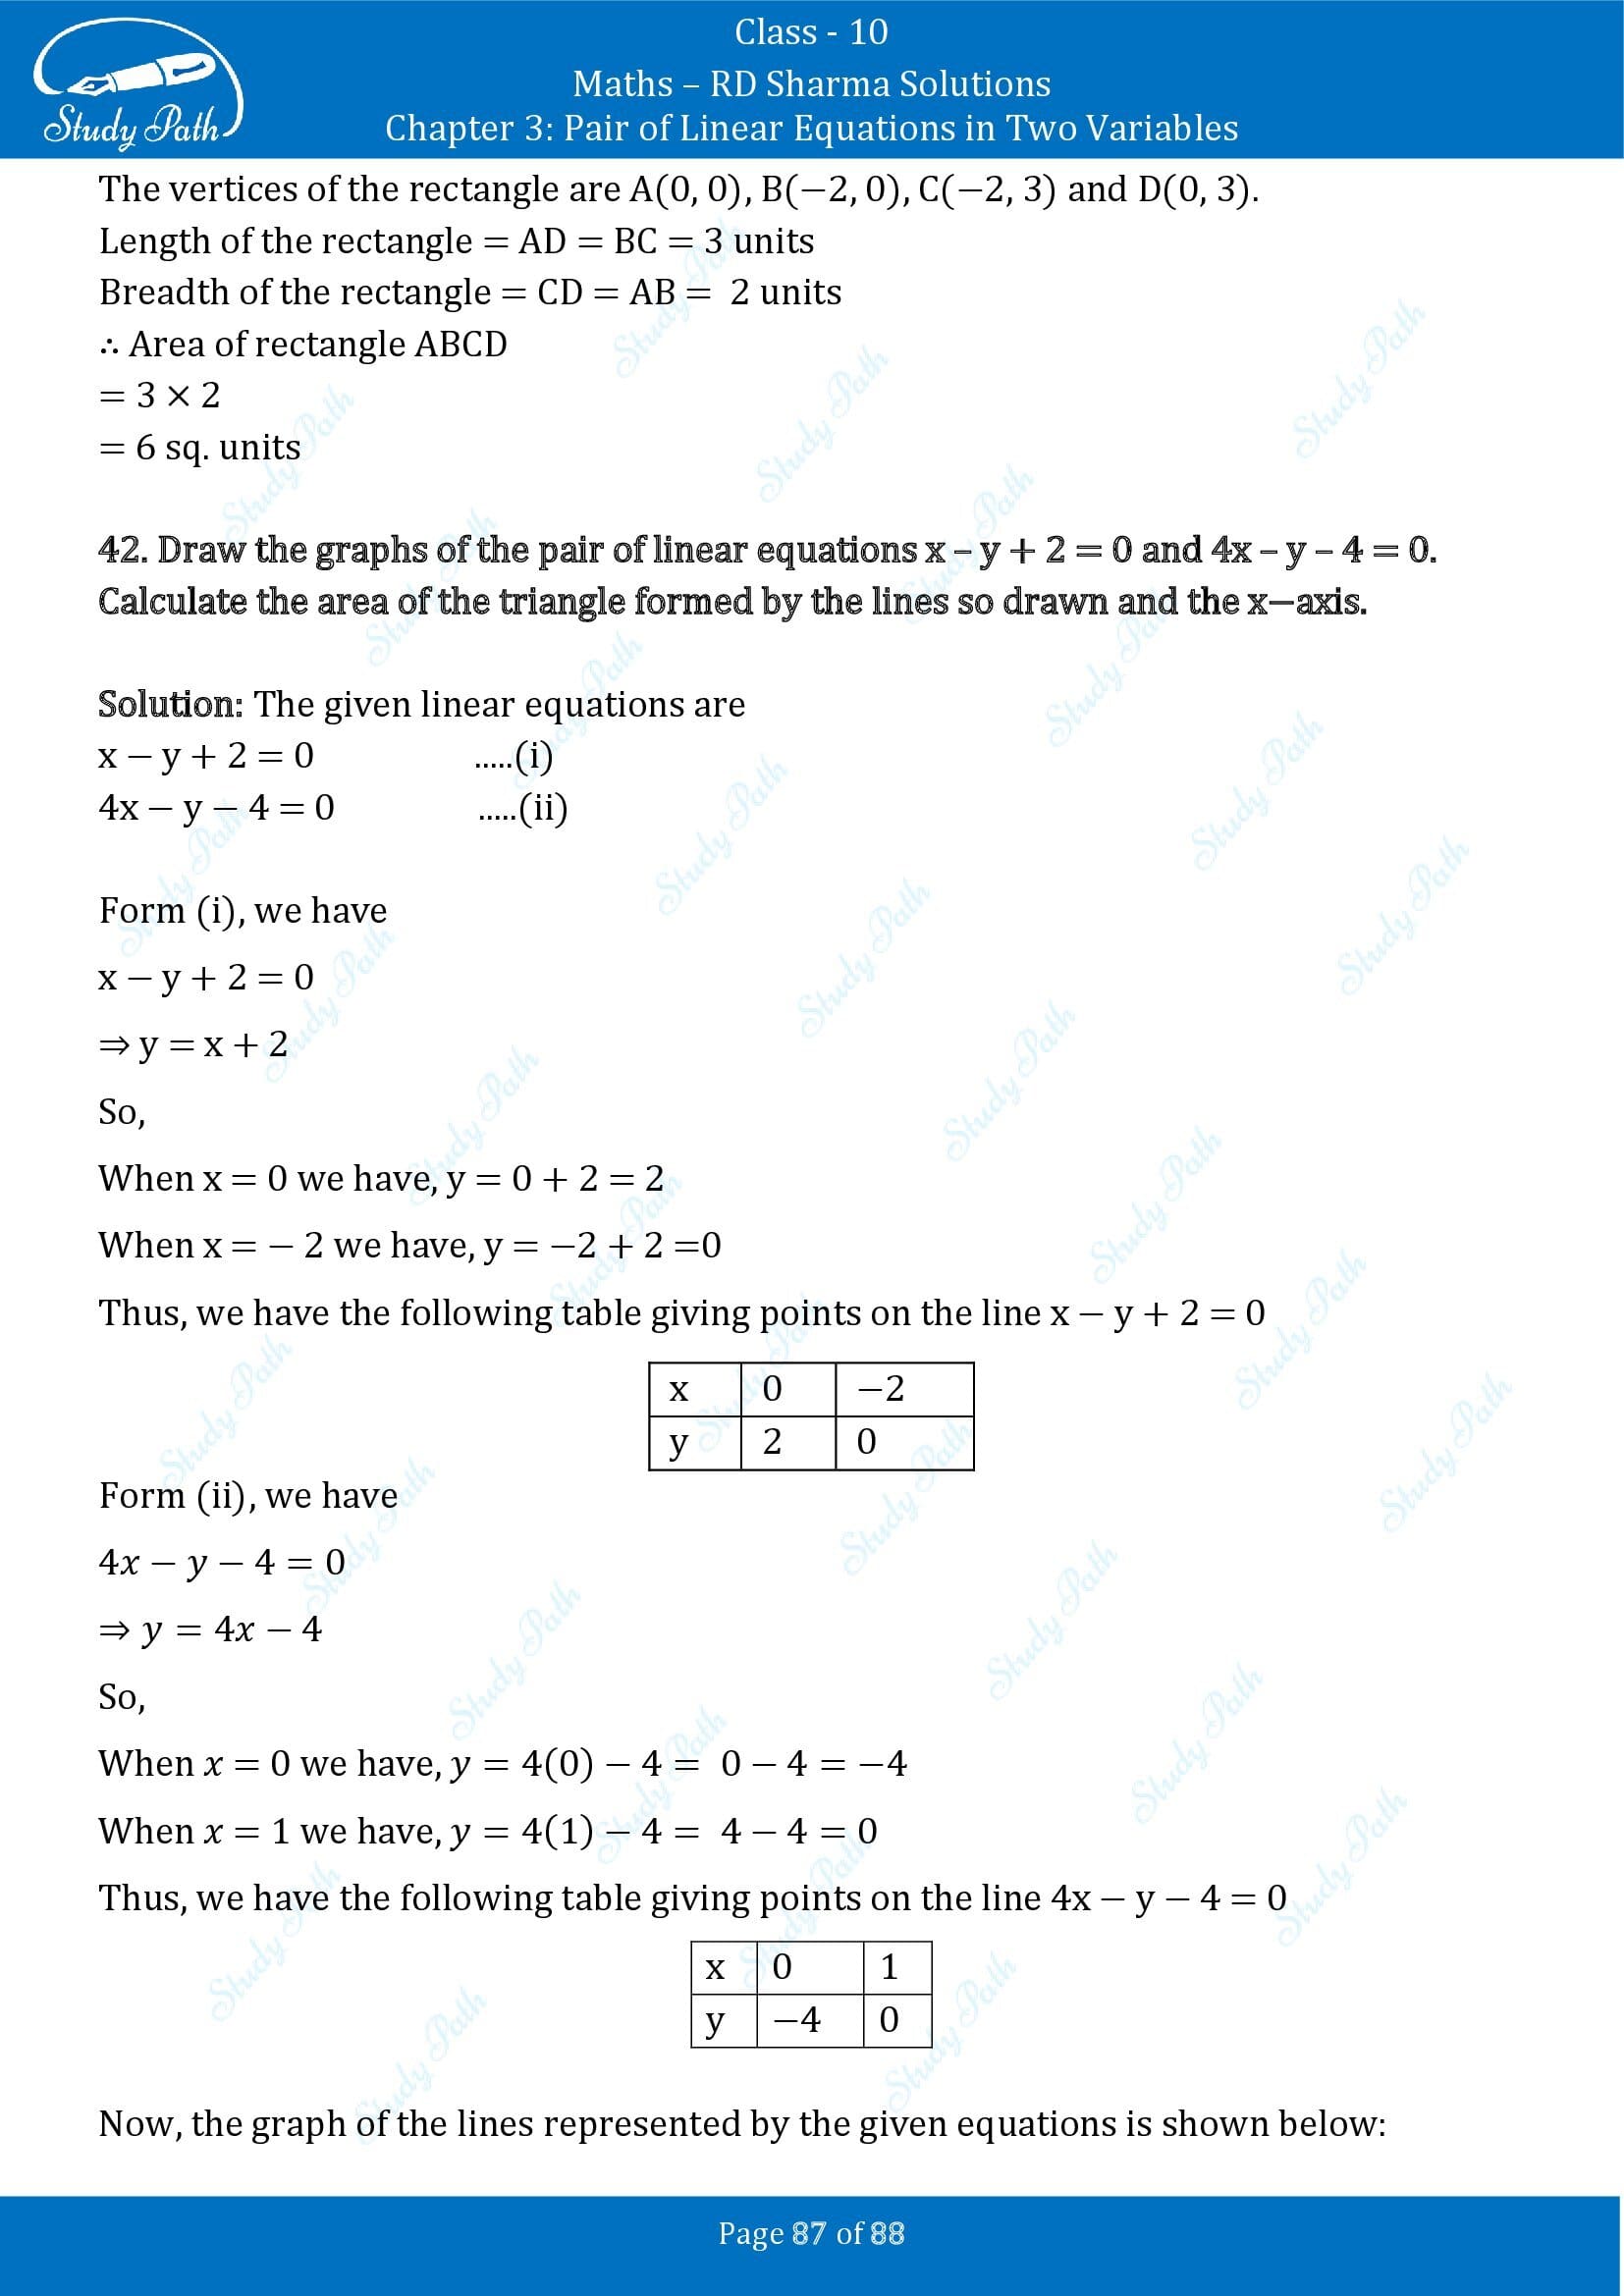 RD Sharma Solutions Class 10 Chapter 3 Pair of Linear Equations in Two Variables Exercise 3.2 00087